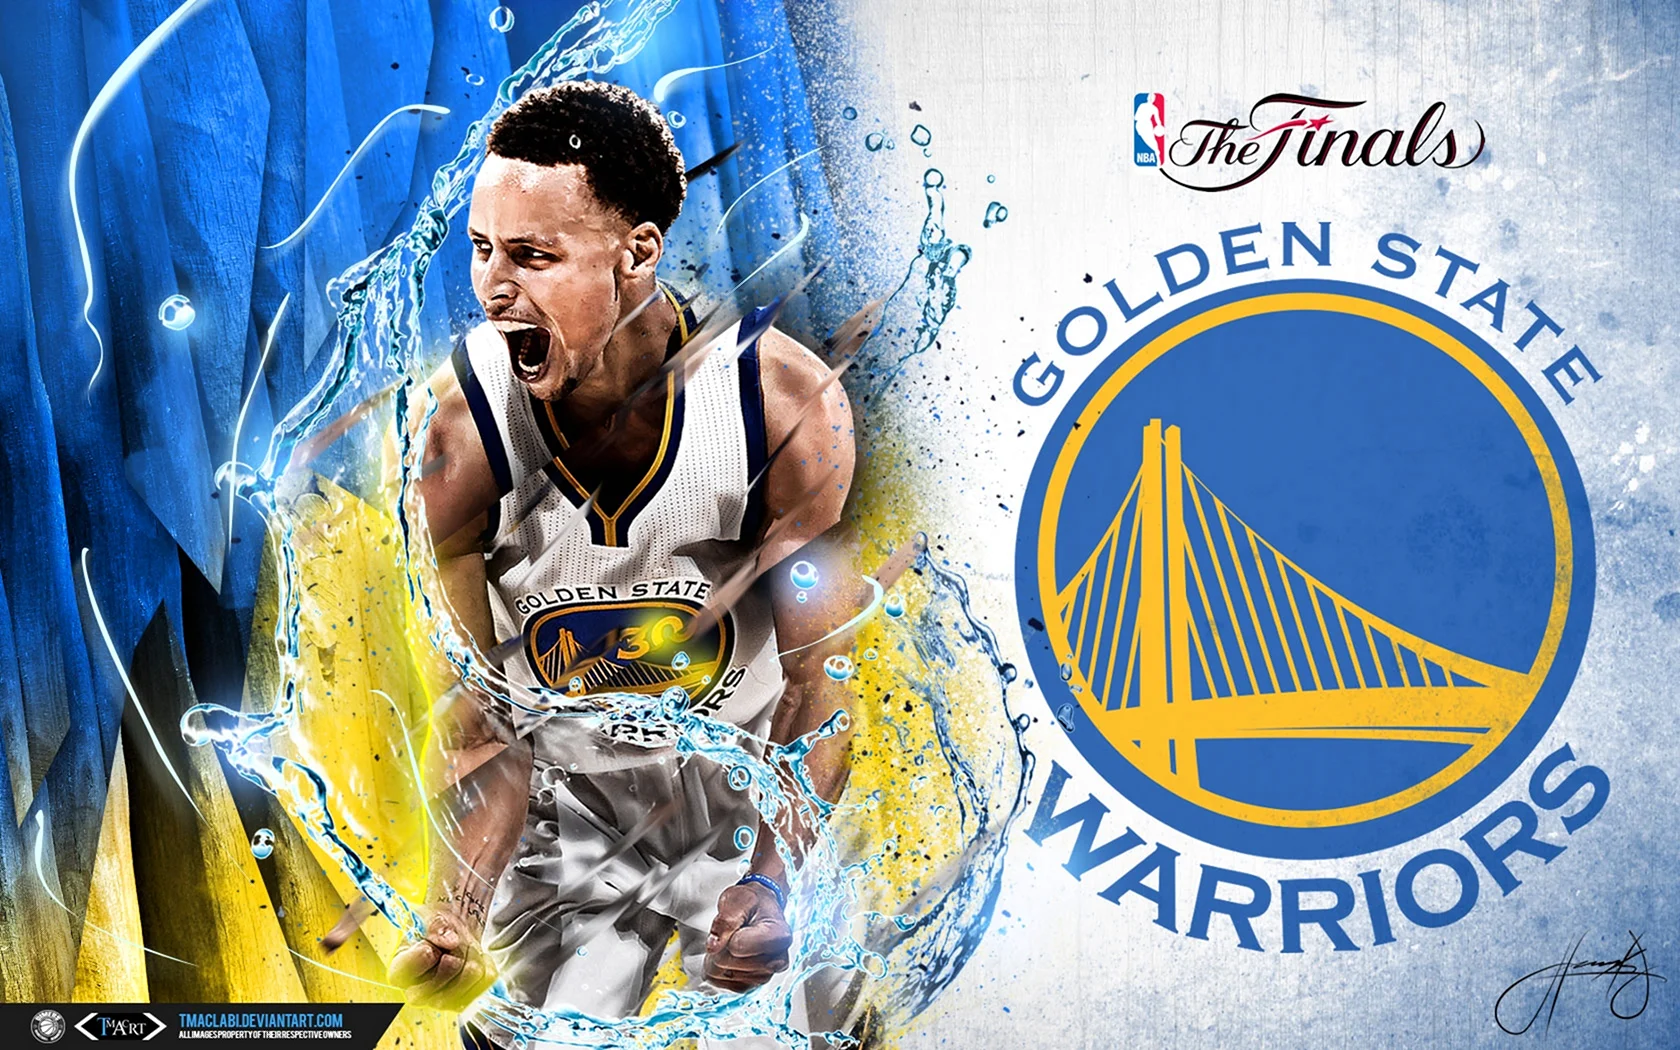 Golden State Стефан карри